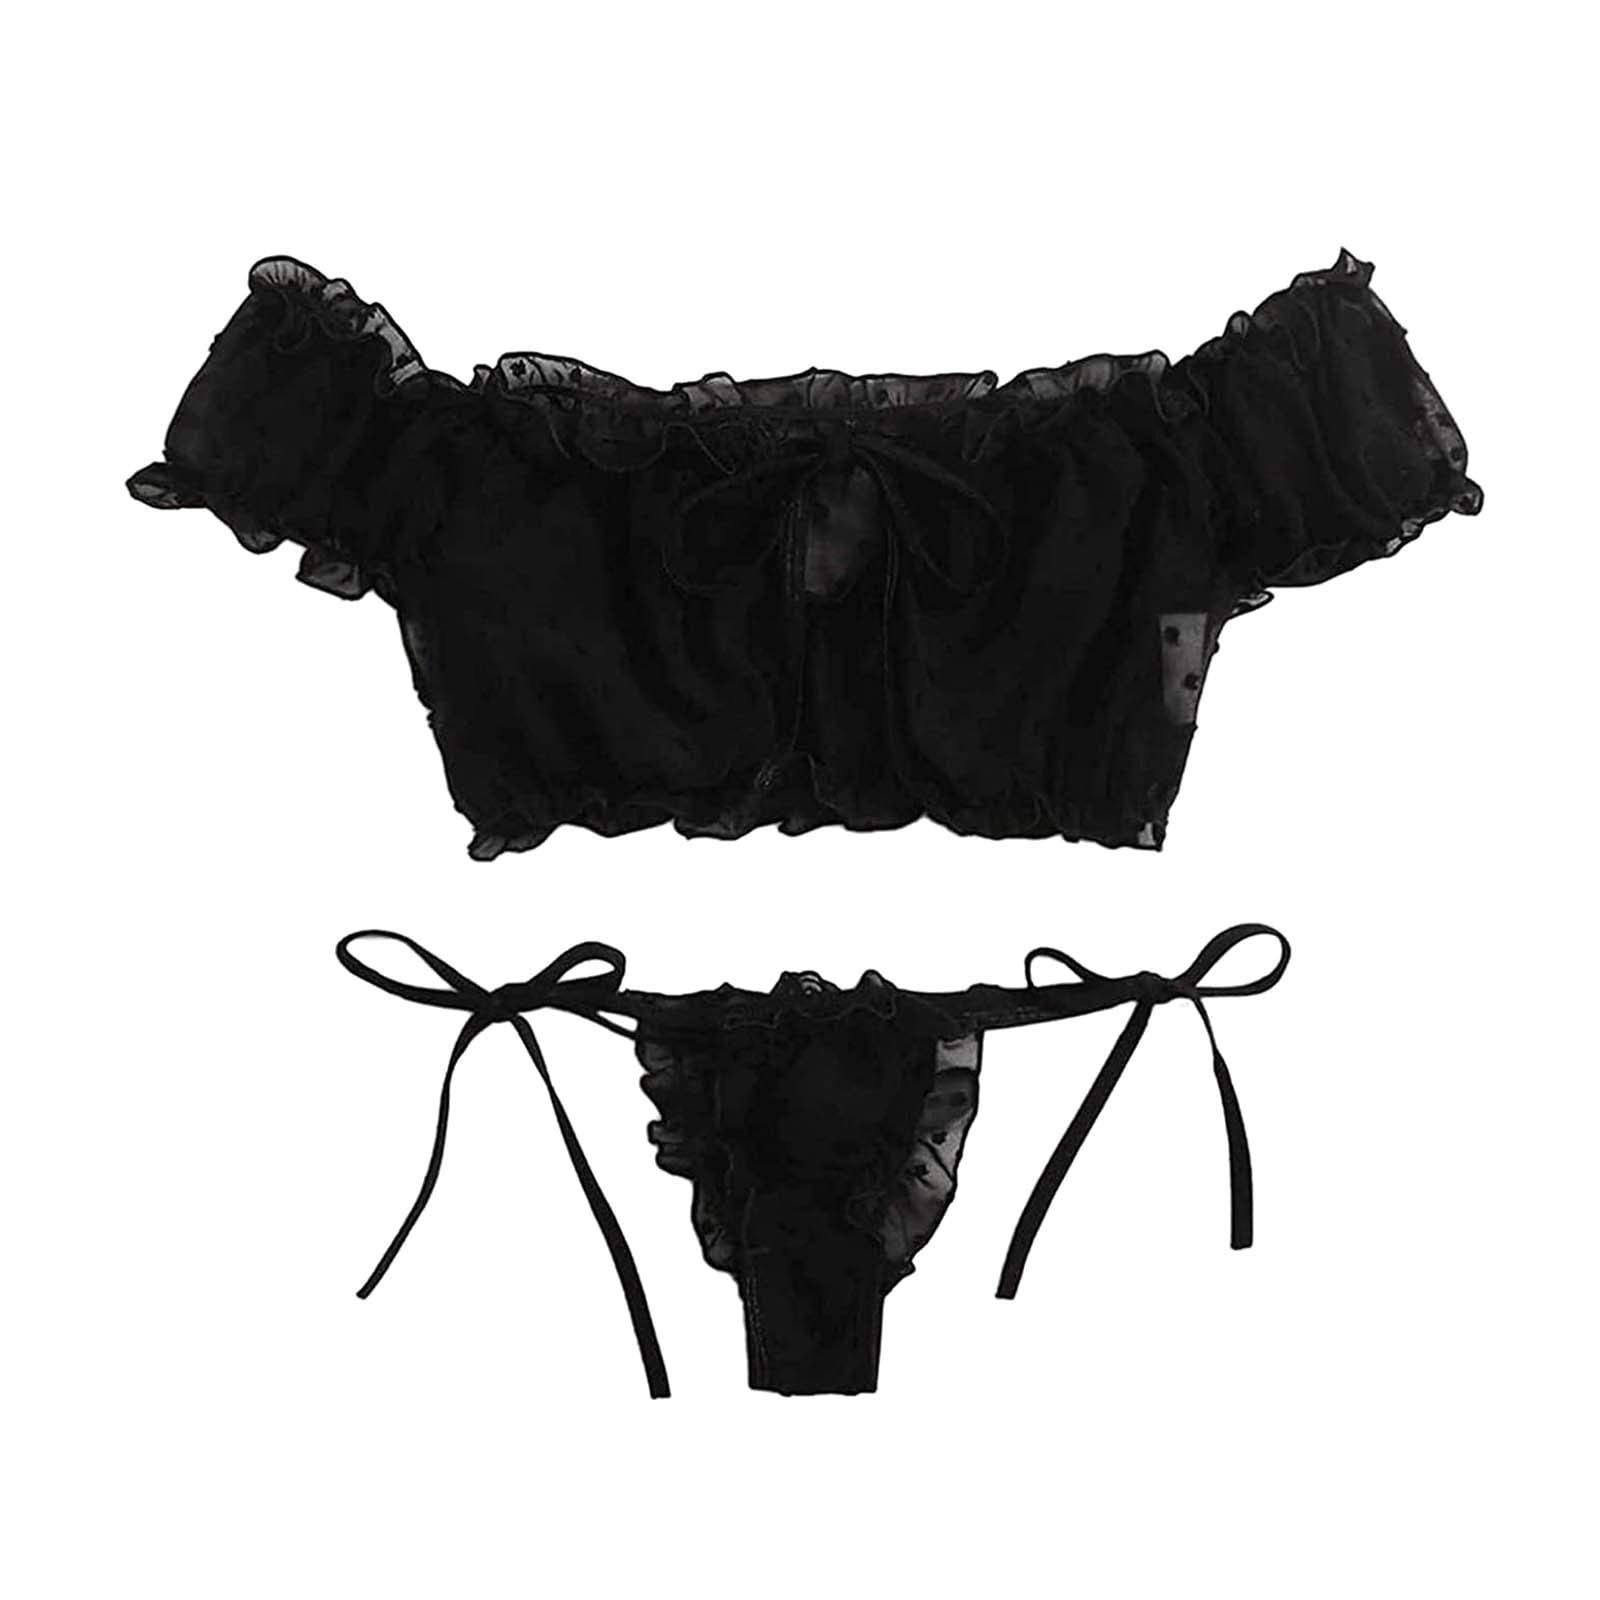 Biziza Womens Mesh Sheer See Through Lingerie Set Sexy Lace Bra And Panty 2 Piece Black